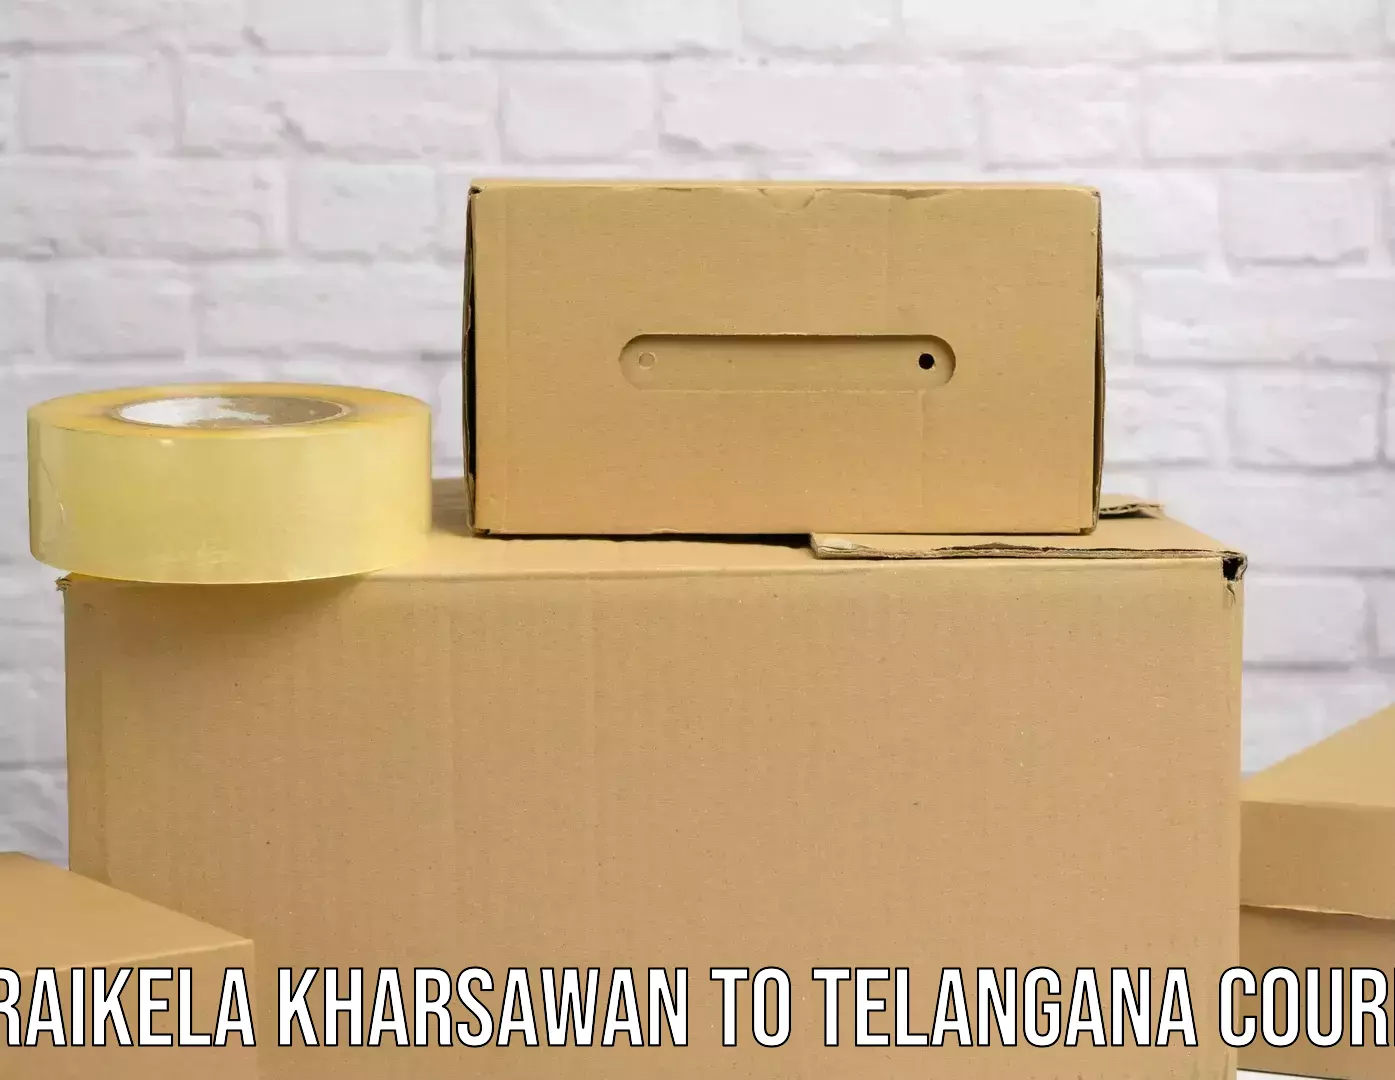 End-to-end delivery Seraikela Kharsawan to Bhainsa